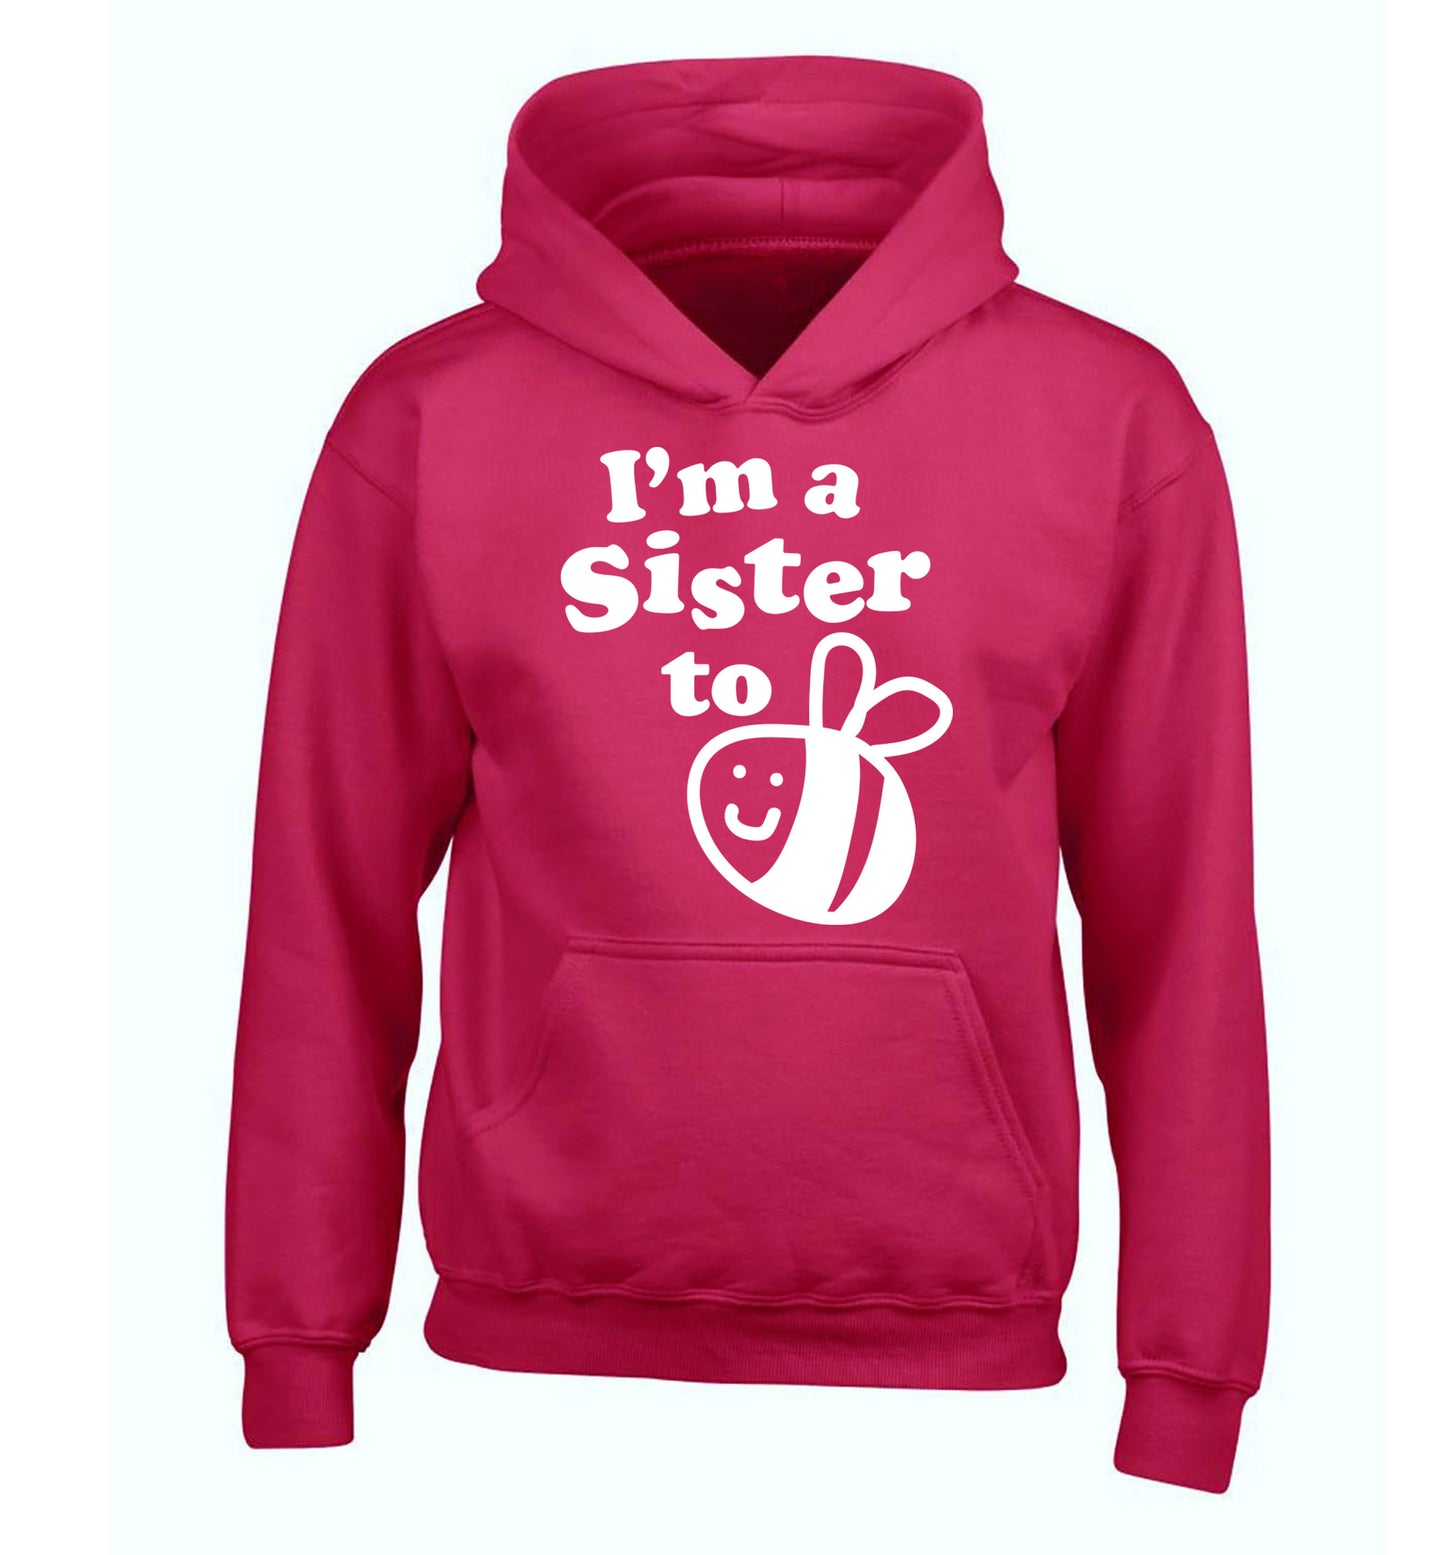 I'm a sister to be children's pink hoodie 12-14 Years